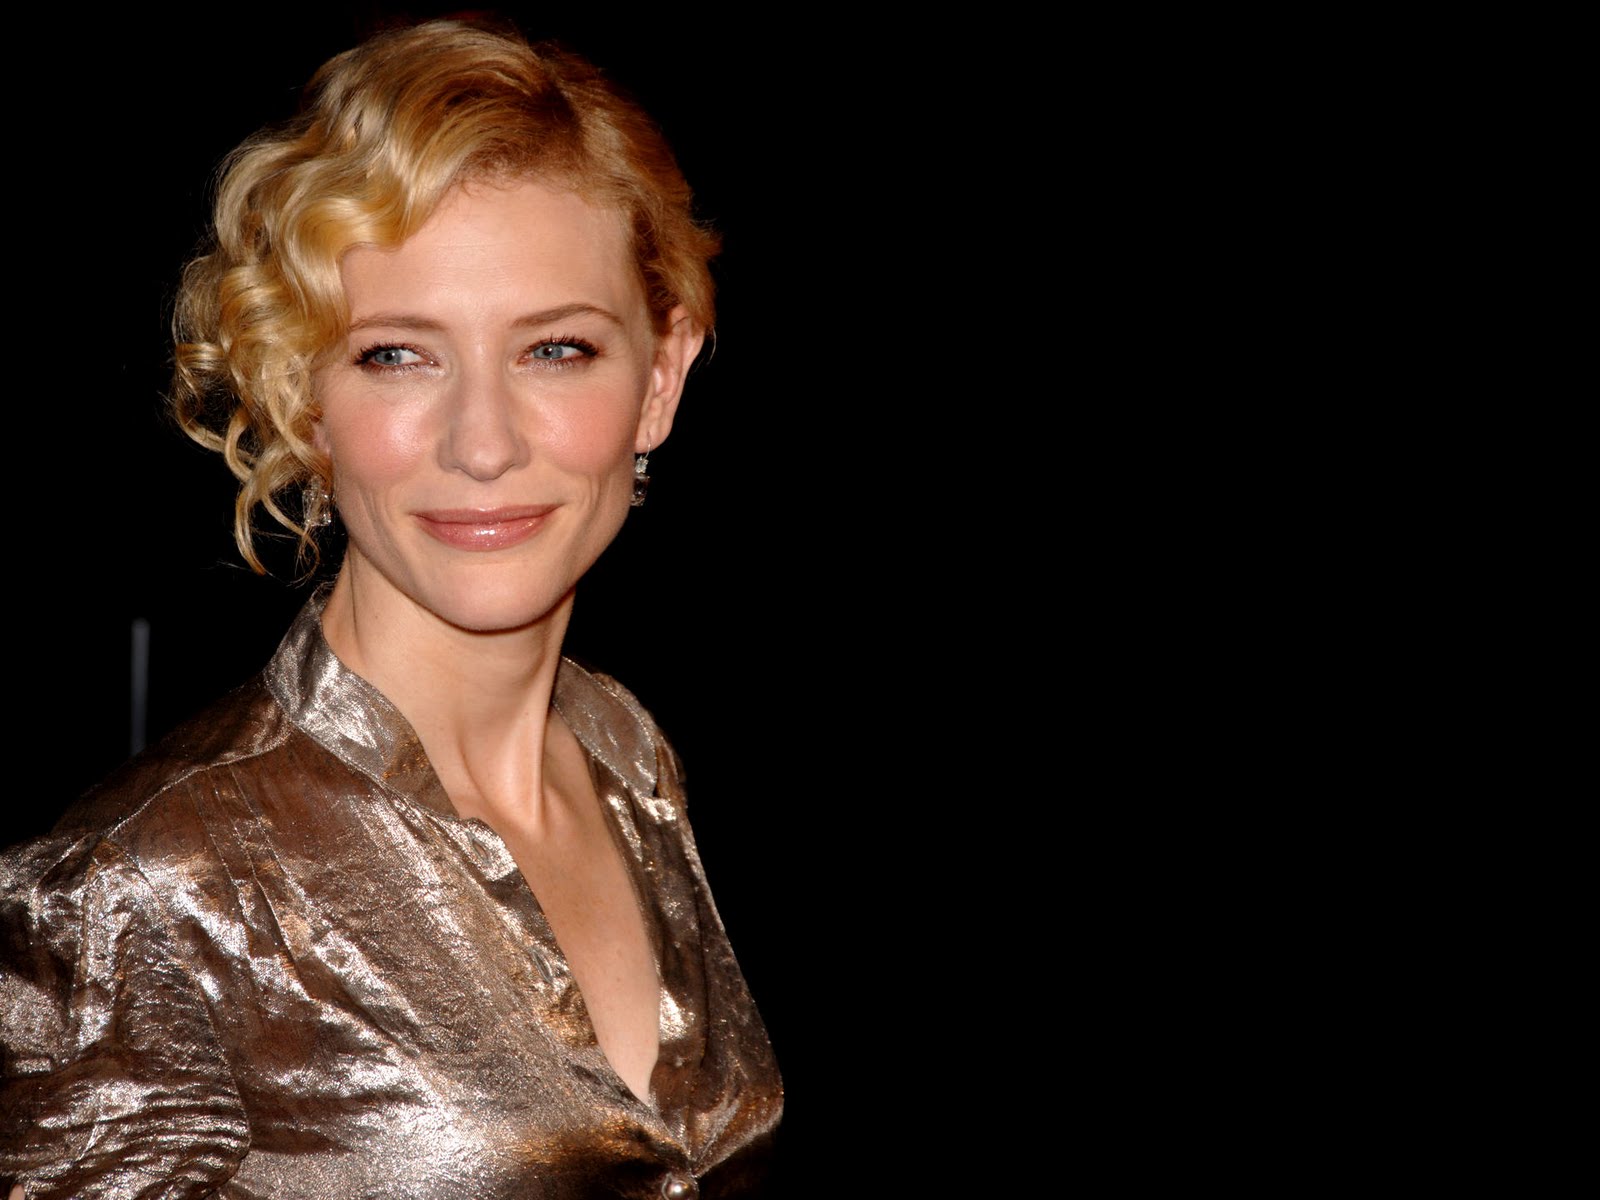 Hot Cate Blanchett Pictures. 